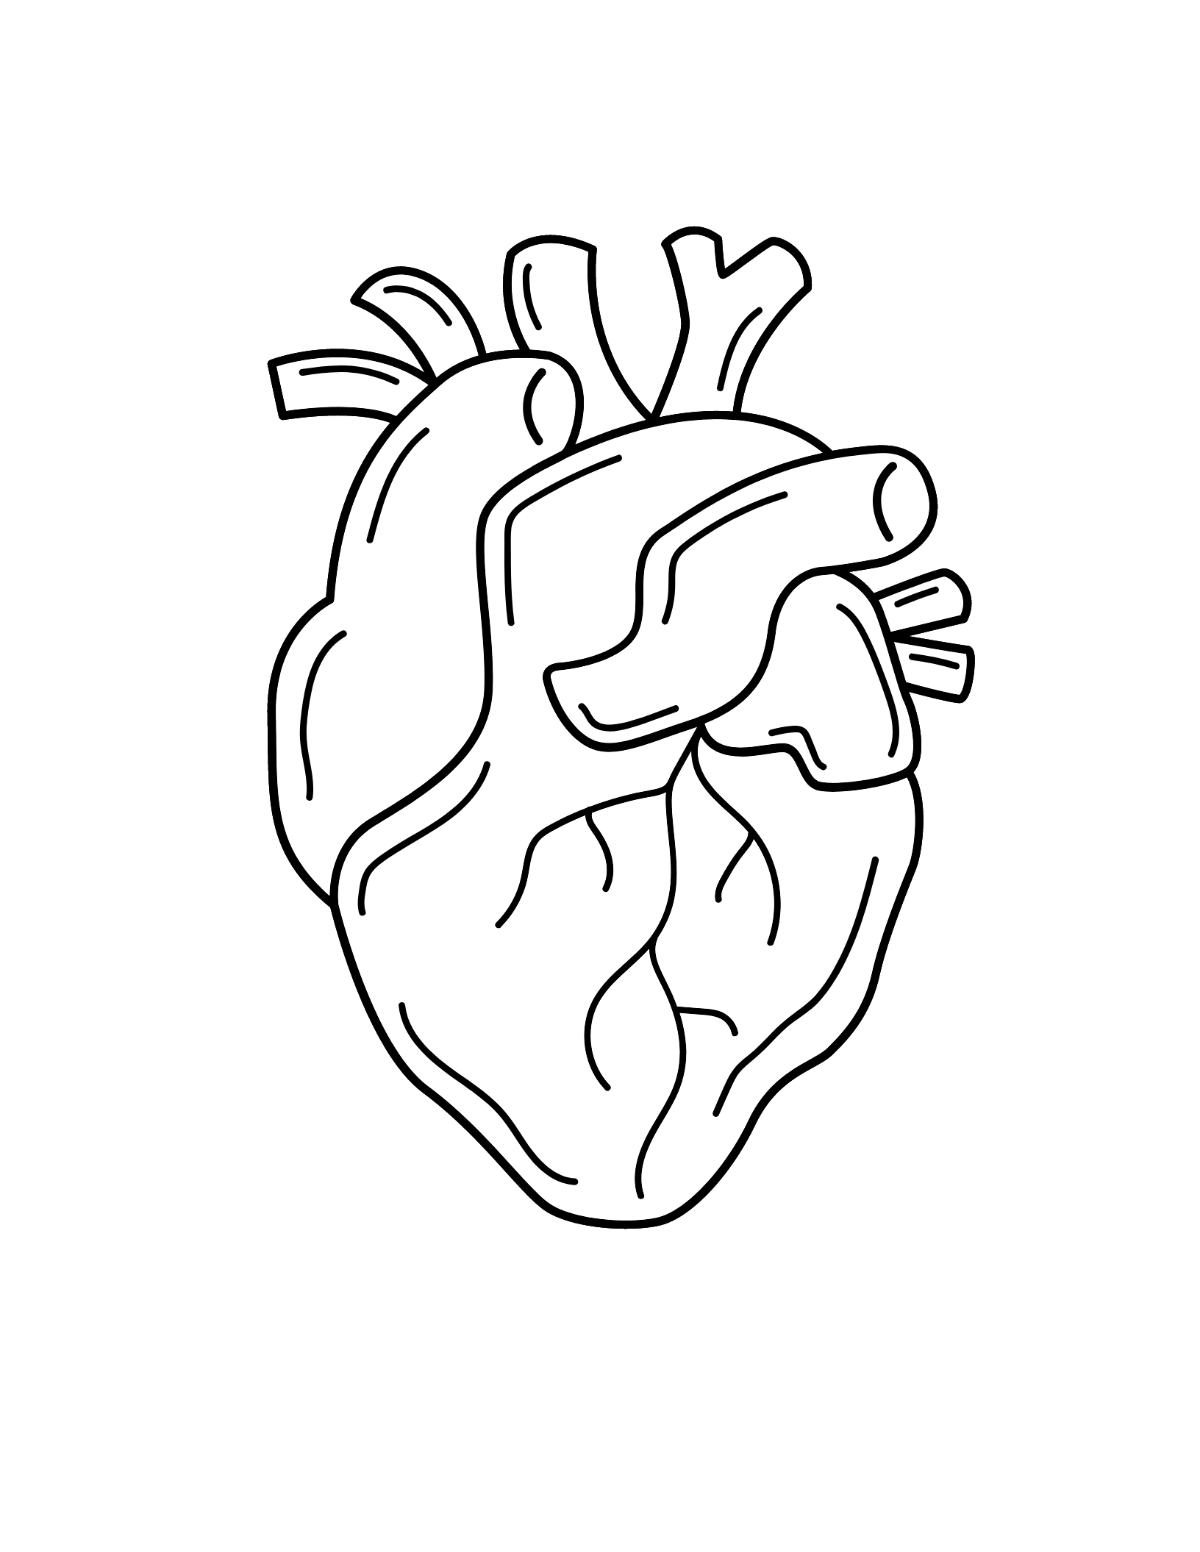 Real Heart Outline Coloring Page Template